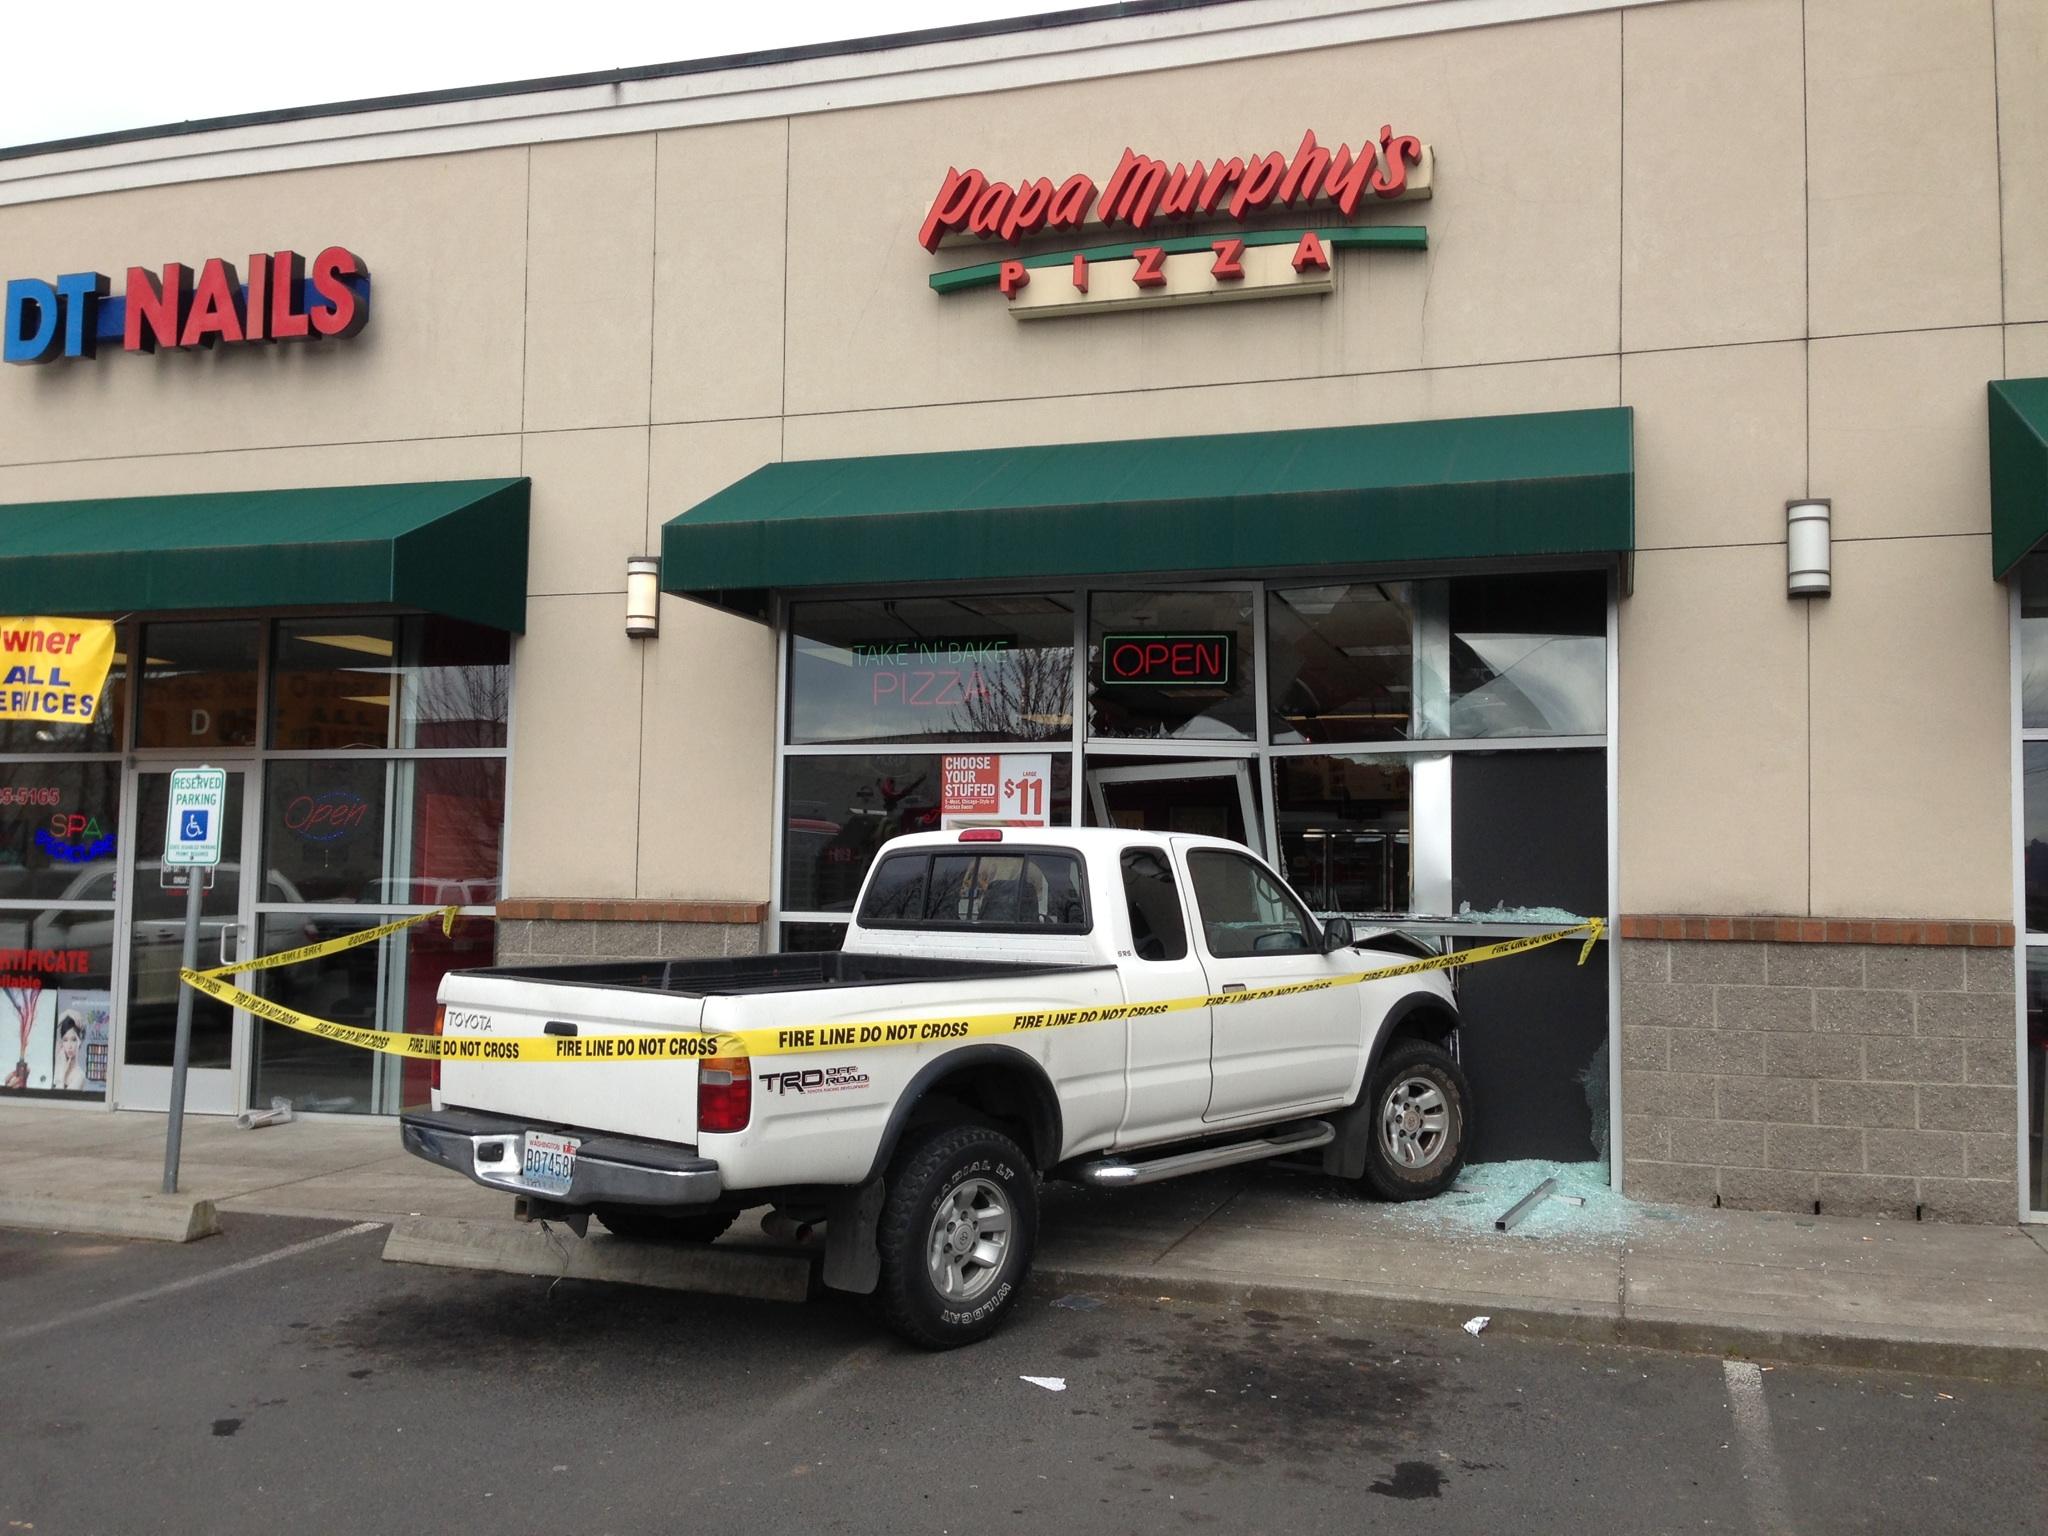 A Woodland teen accidentally drove his pickup truck into a Papa Murphy's just before noon Wednesday.